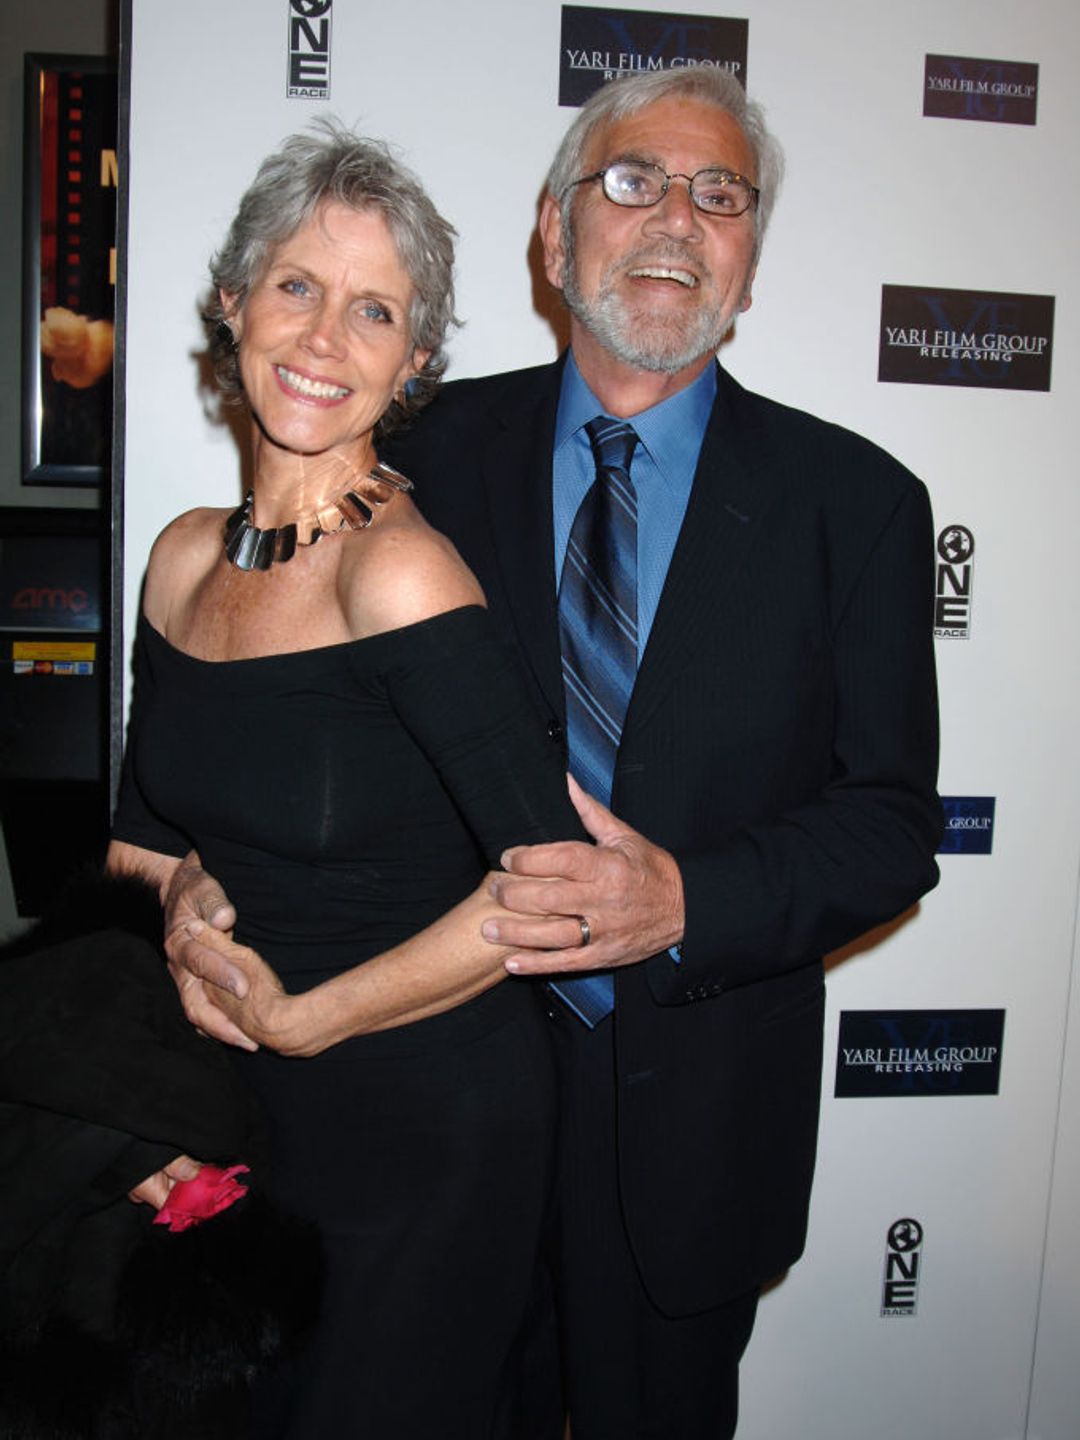 Shannon Wilcox and Alex Rocco cuddled up for a photo